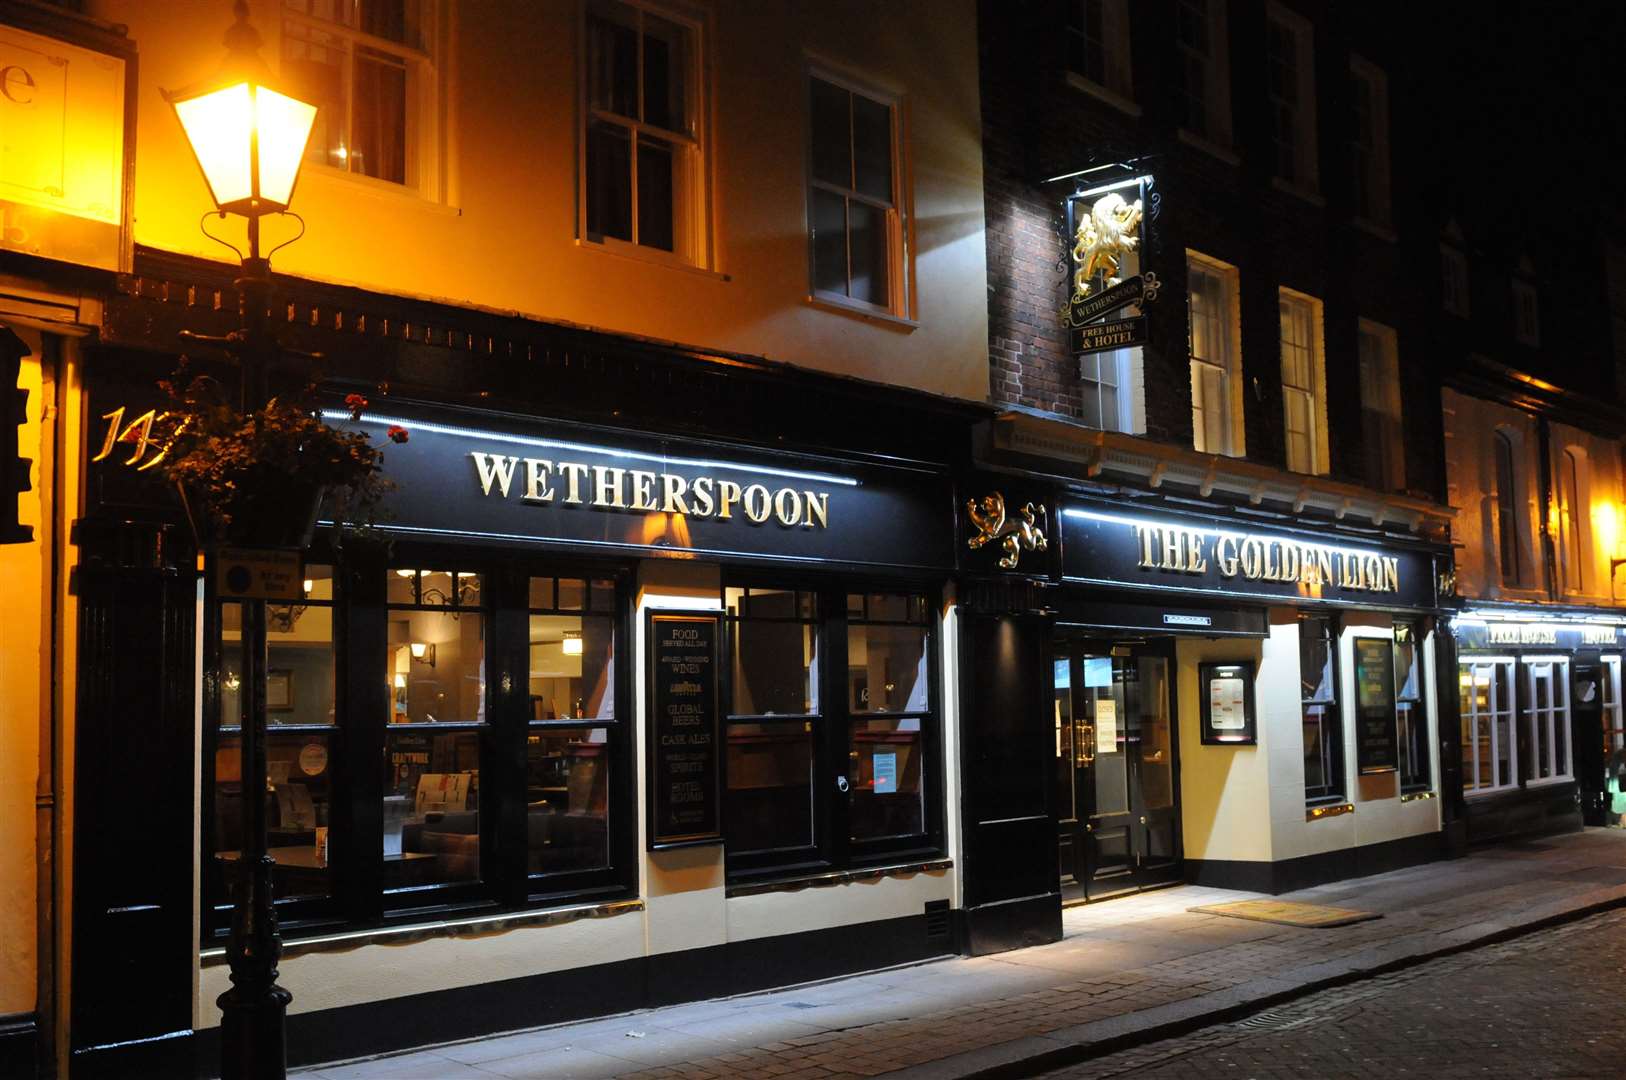 It still isn't known when the lights will be turned on again at Wetherspoons pubs across the UK